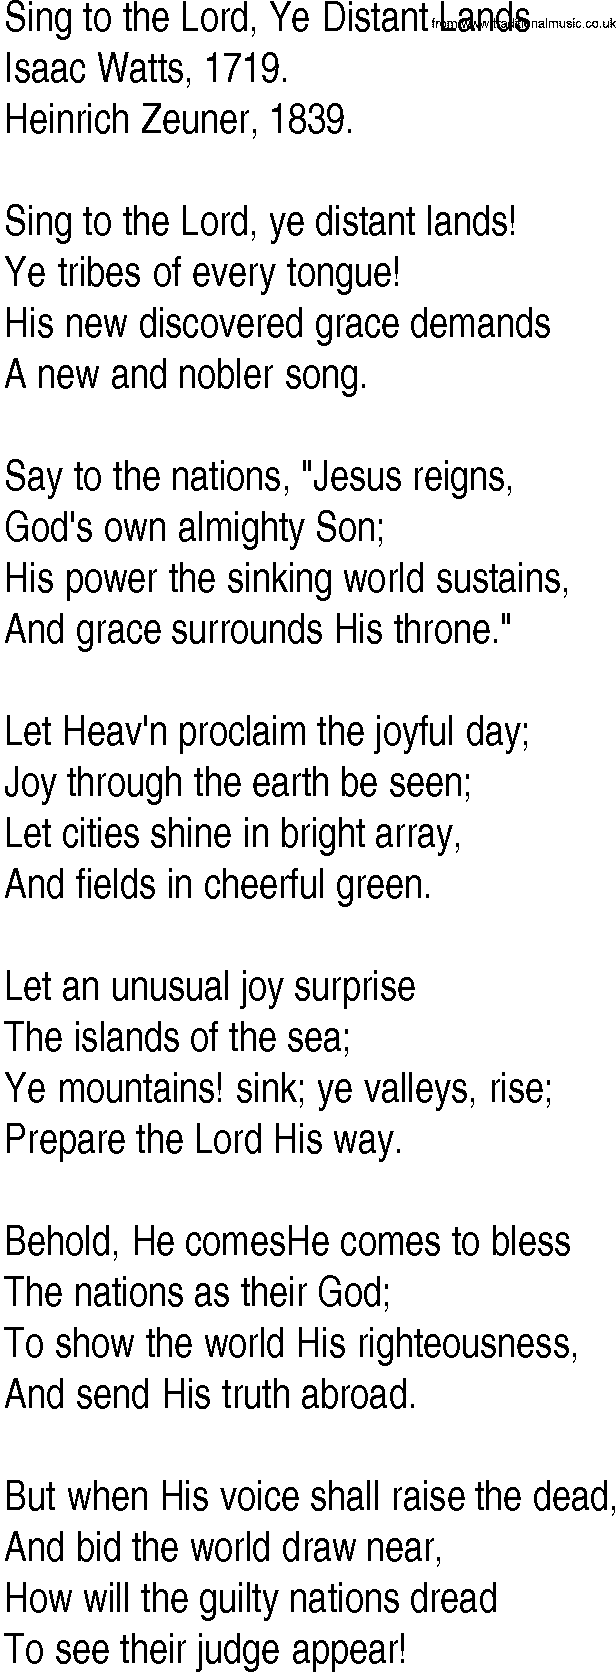 Hymn and Gospel Song: Sing to the Lord, Ye Distant Lands by Isaac Watts lyrics